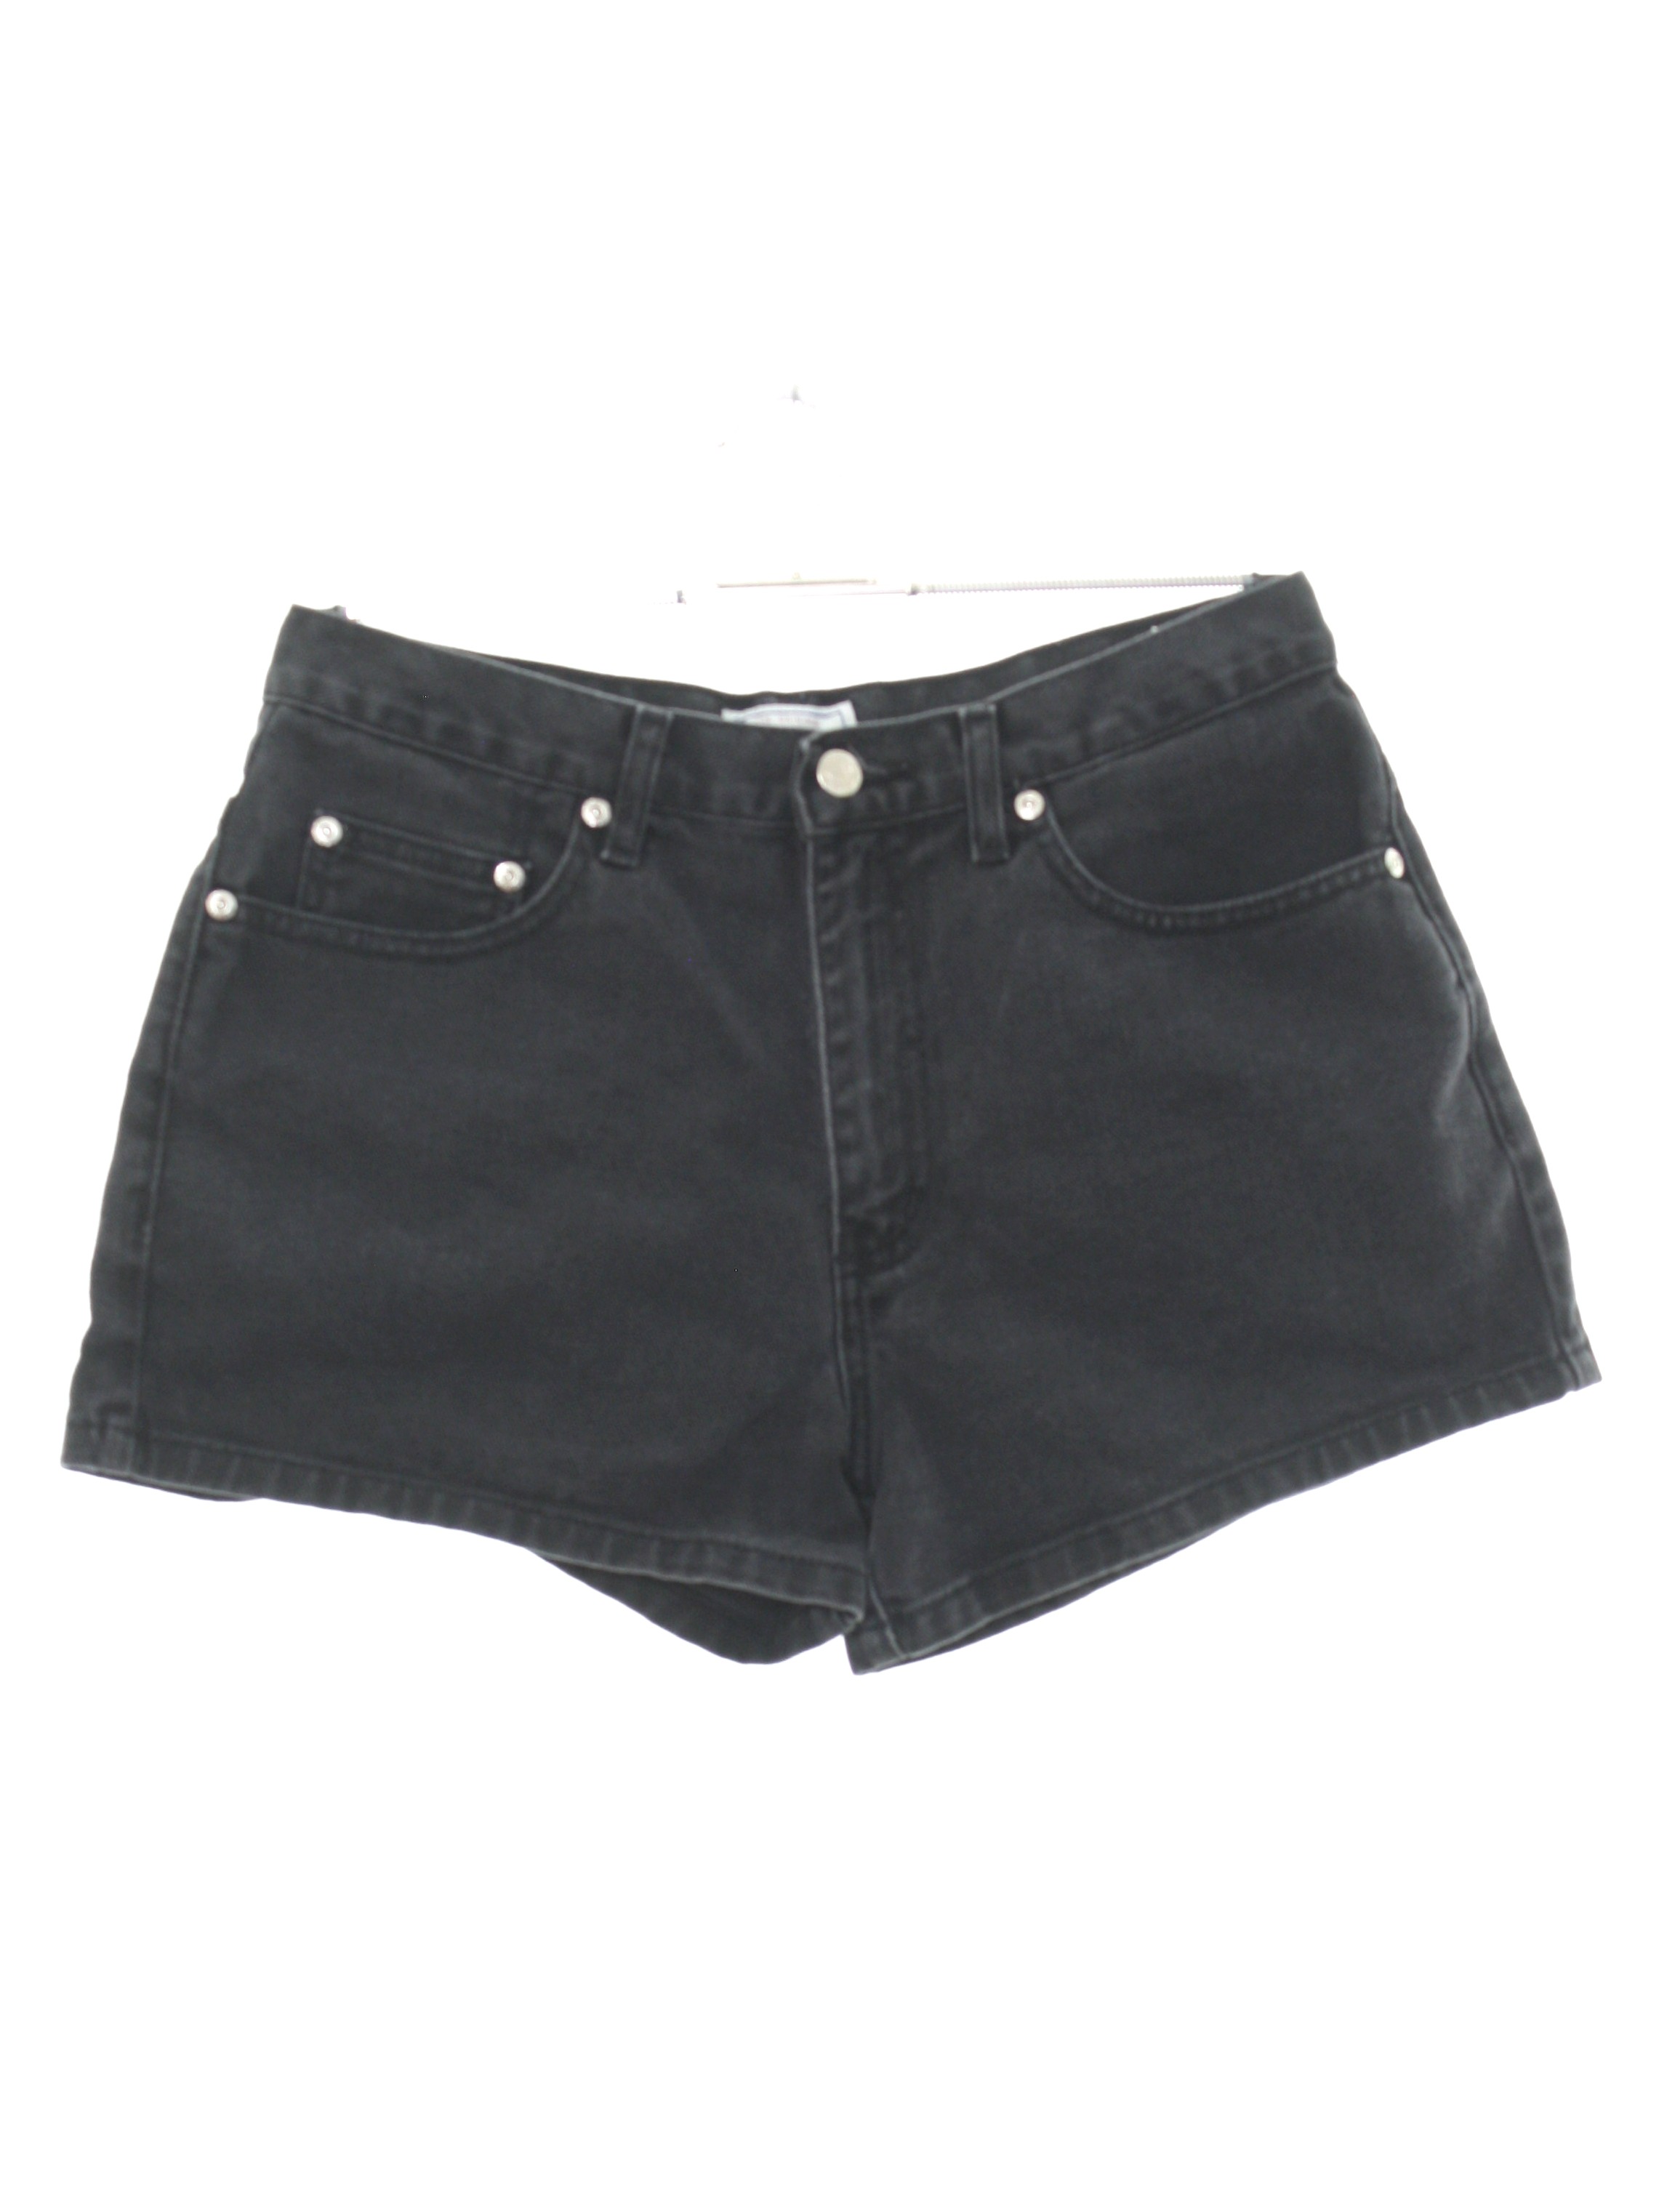 1990's Shorts (Arizona Jean Company): 90s -Arizona Jean Company- Womens  faded black background cotton high rise denim jorts. Classic 5 pocket style  and zip fly. Assembled in Mexico. Actual size tag reads